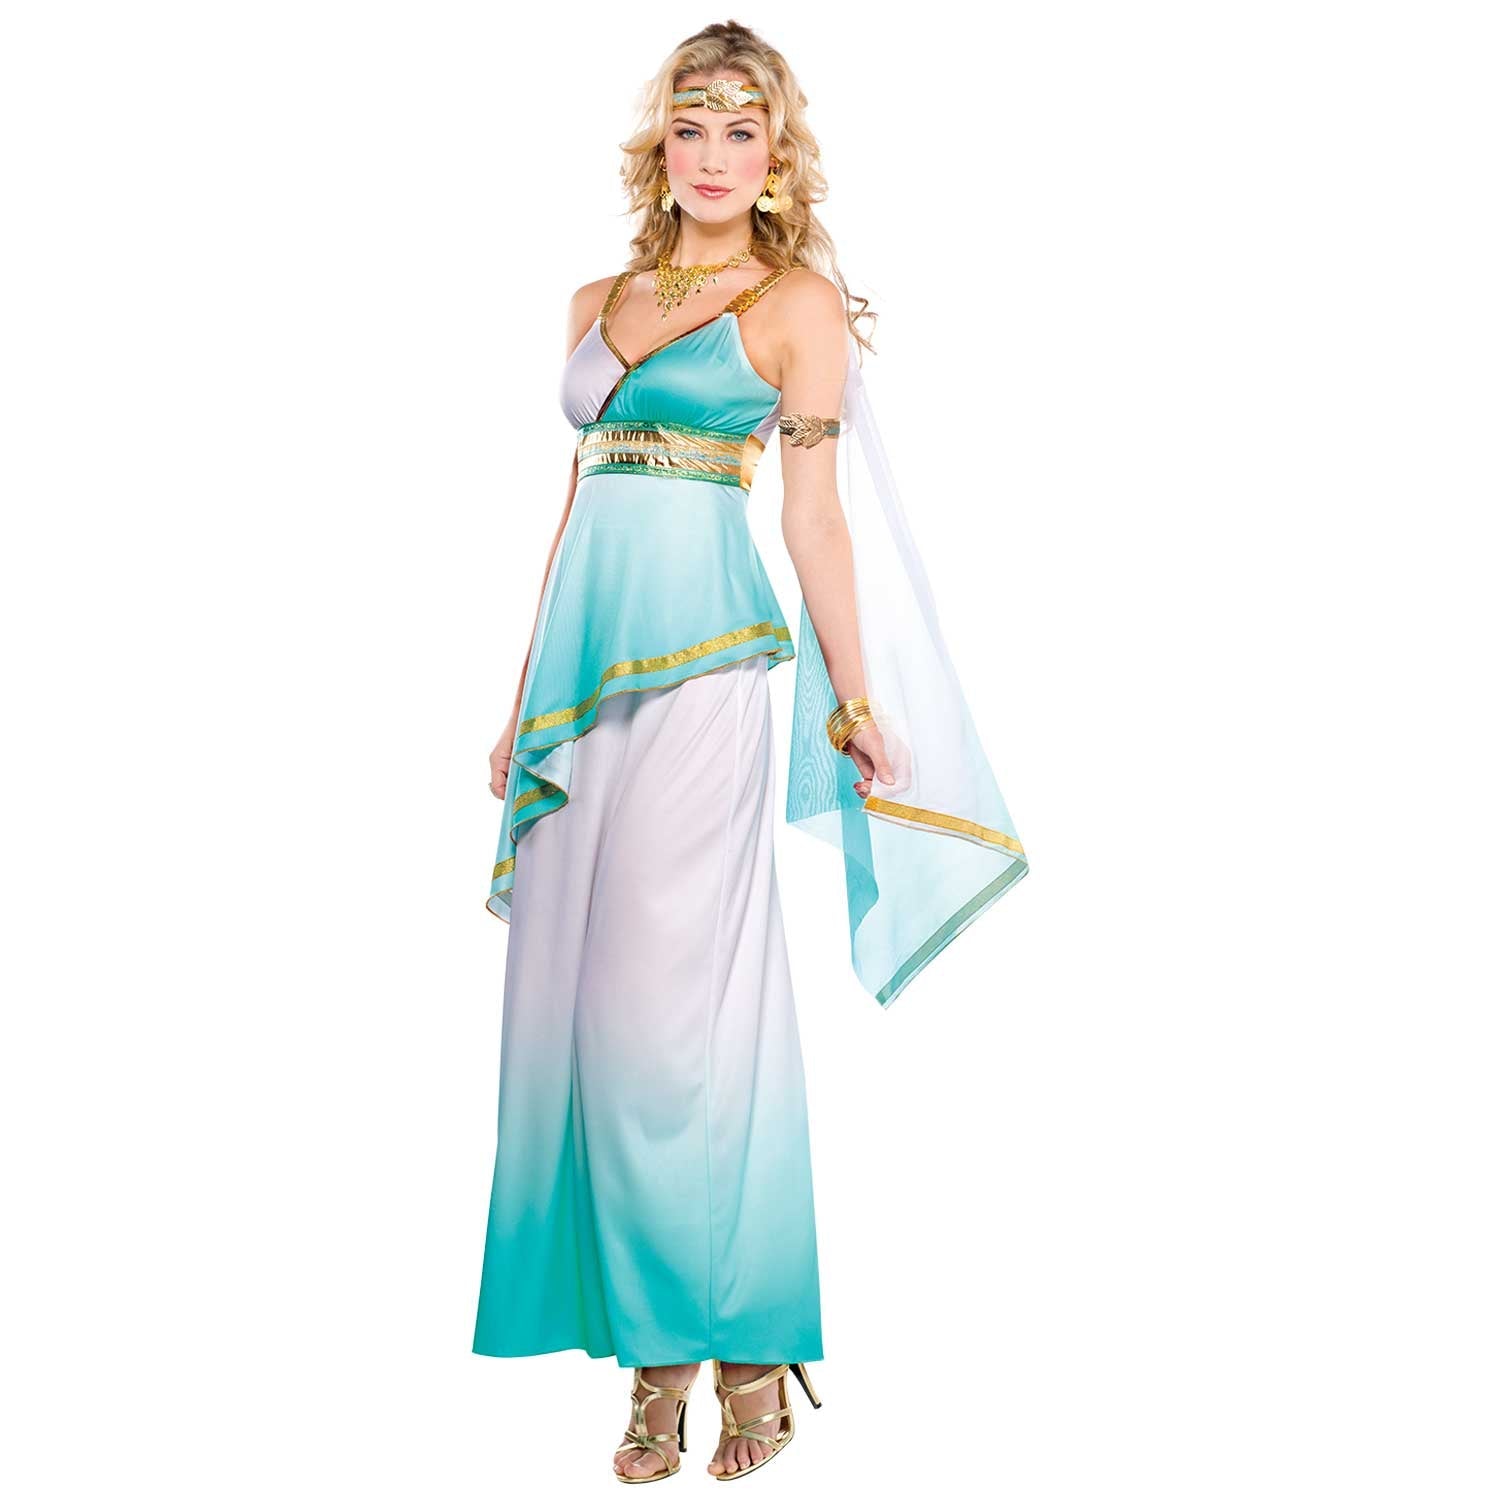 Ladies Grecian Goddess Costume includes dress, headband and arm band. The Grecian Goddess Costume features a full-length dress with a faux wrap neckline, empire waist, gold trim and beautiful blue ombre effect. With a matching teal headband with a gold leaf applique.